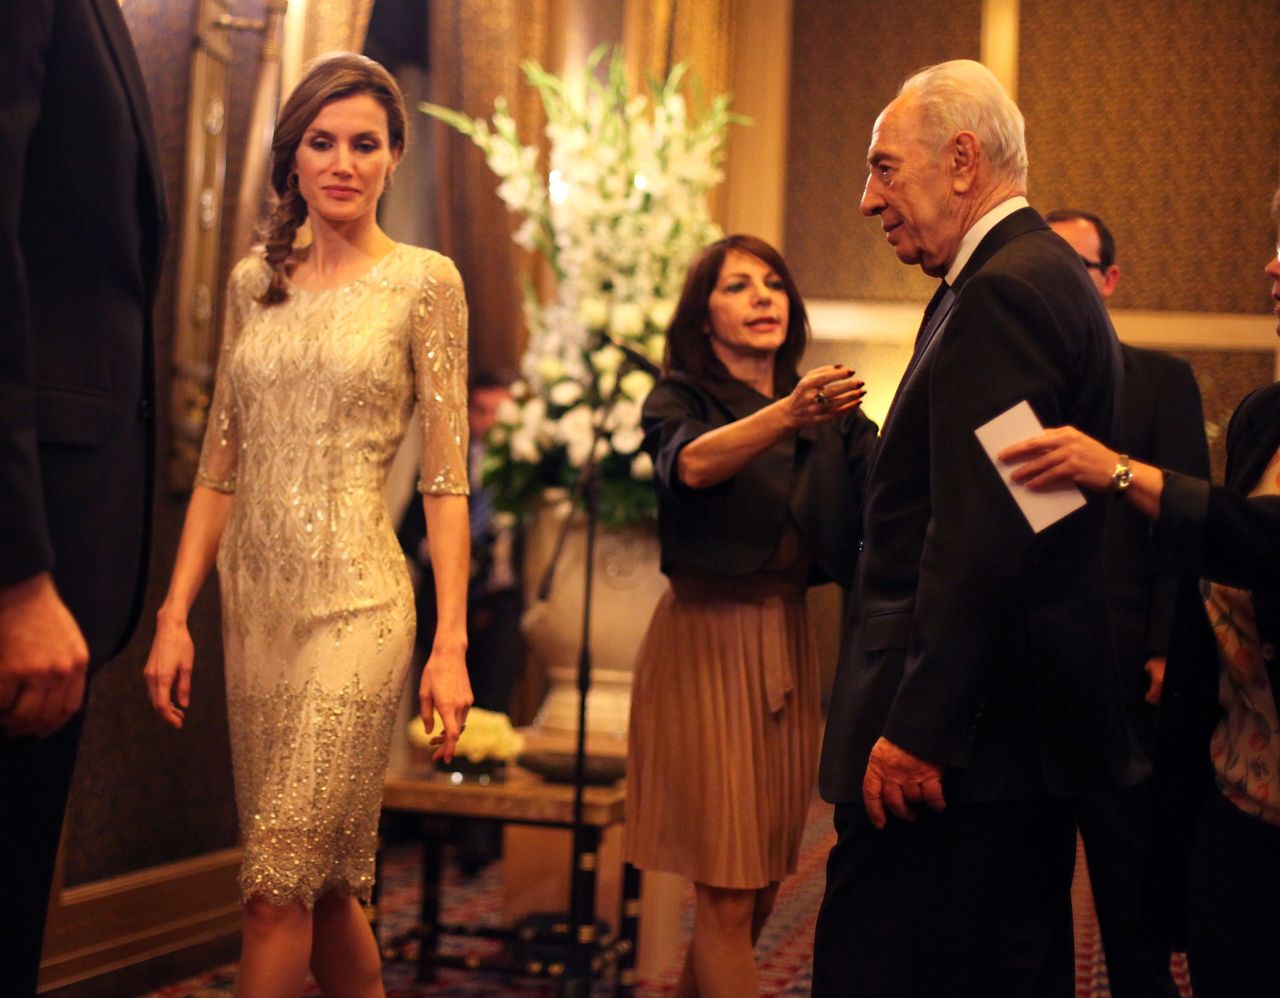 Letizia, Princess of Asturias, a former TV journalist, is known for her demure and chic style. Here she is pictured with Israeli President Shimon Peres during a visit to the country in 2011.